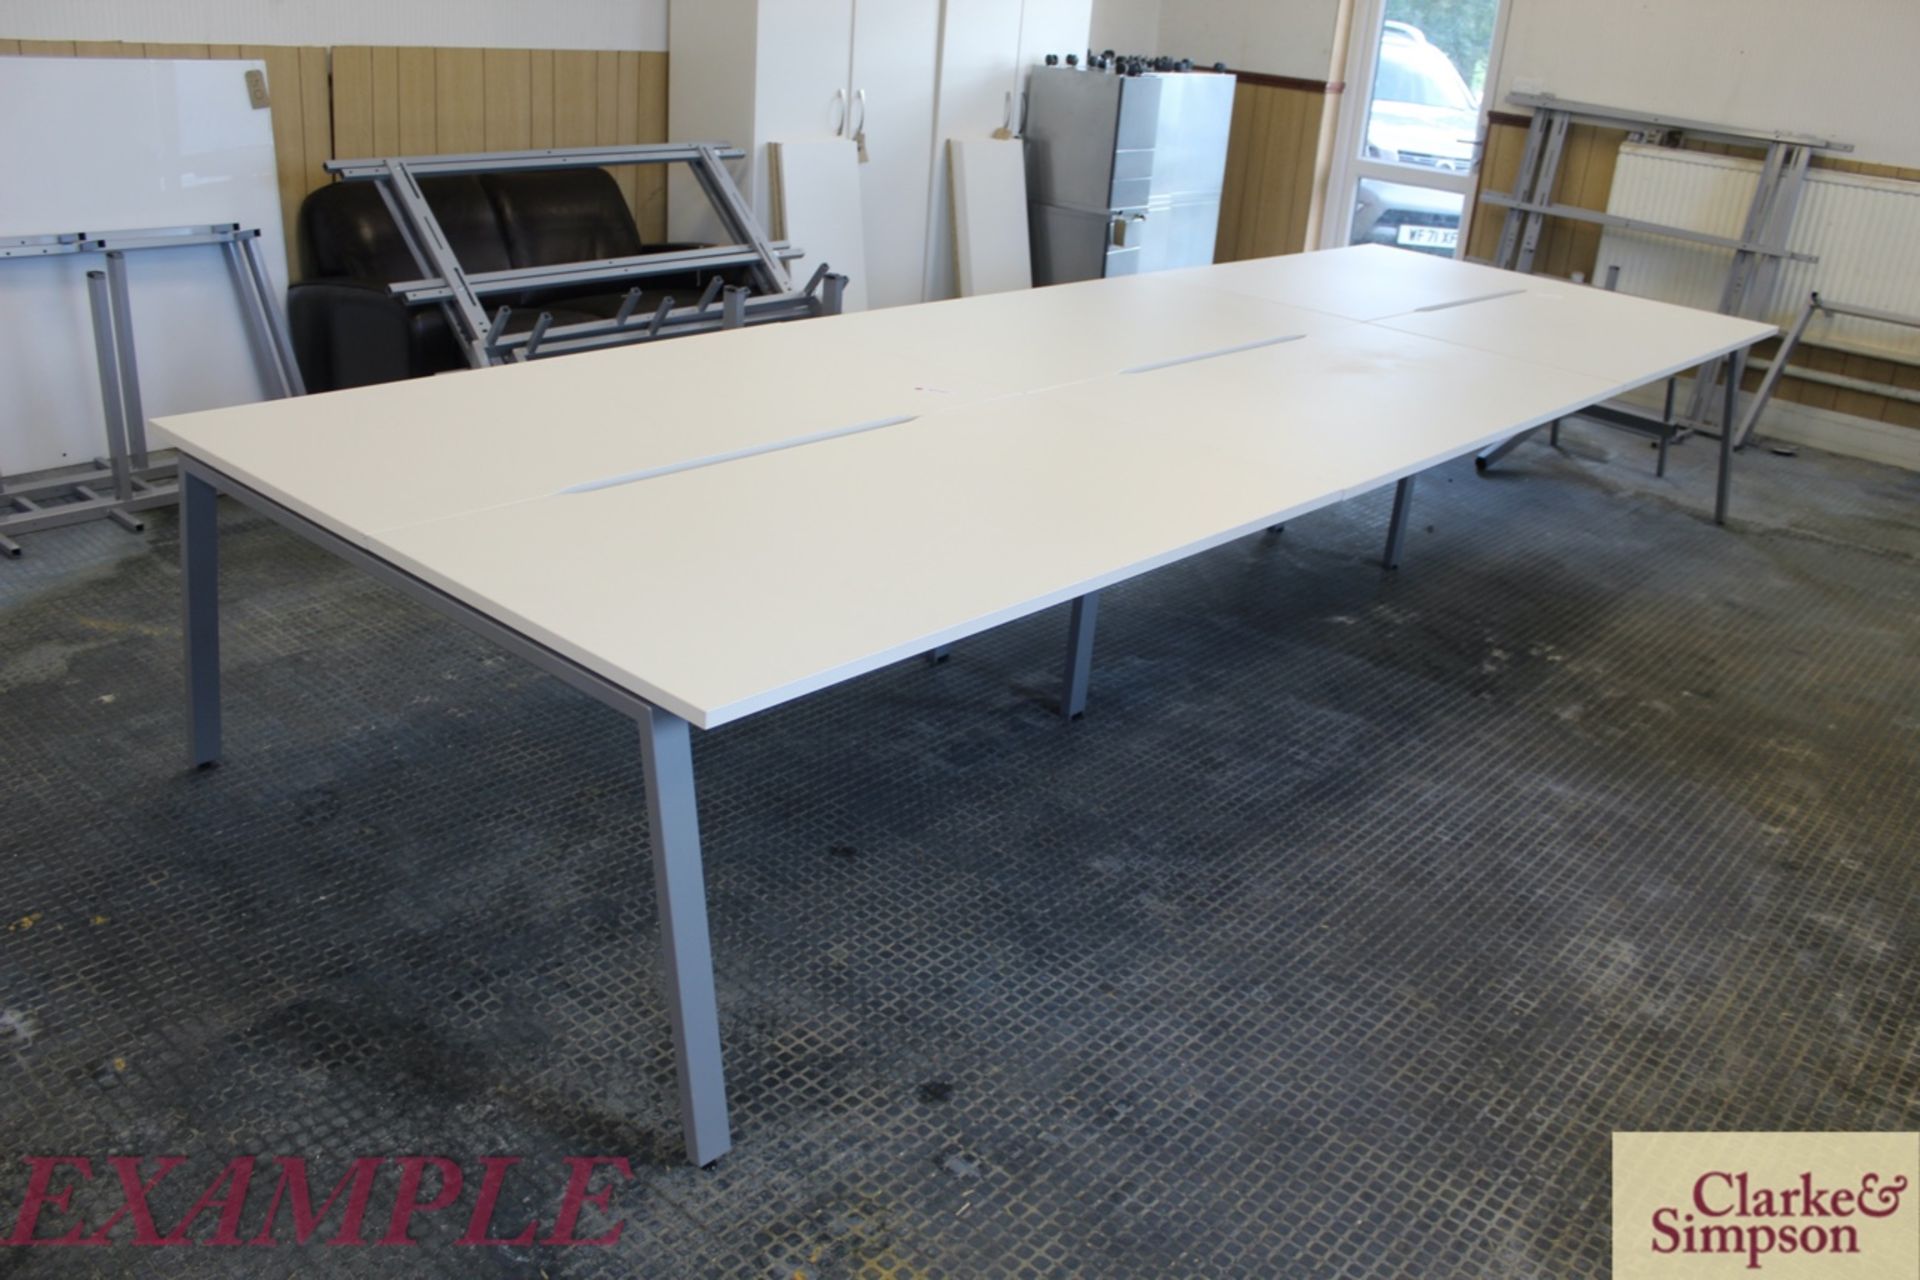 2.4m x 1.6m back-to-back sectional bench desk. Com - Image 3 of 11